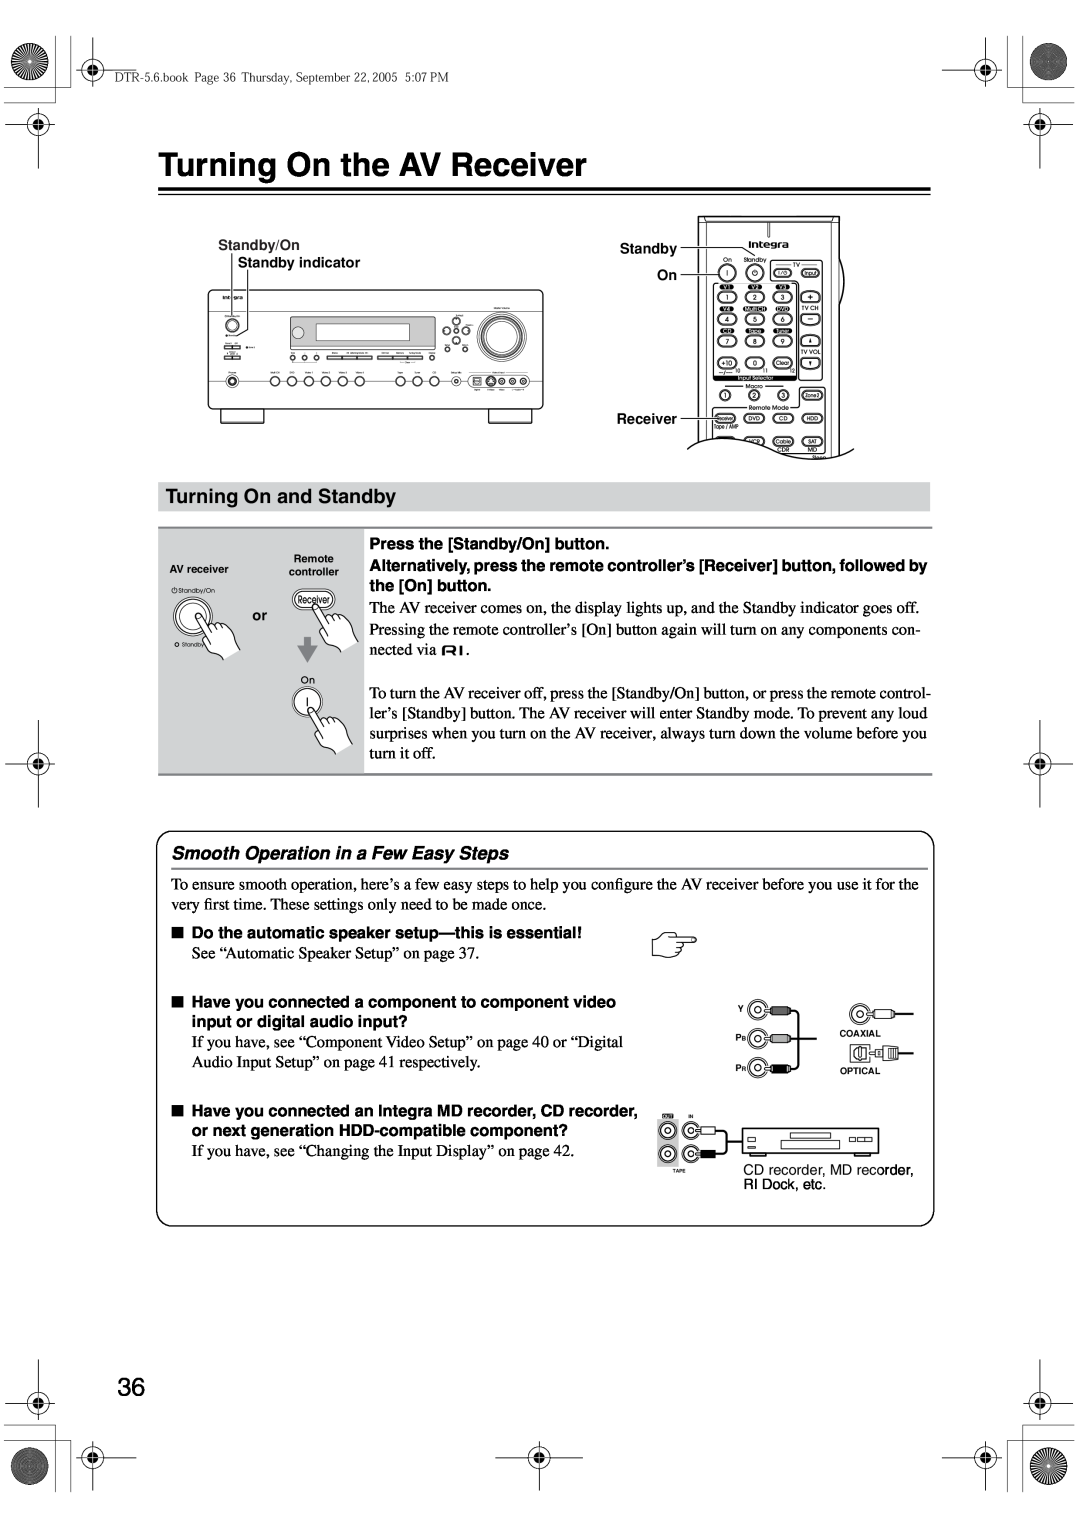 Integra DTR-5.6 instruction manual Turning On the AV Receiver, Turning On and Standby, Smooth Operation in a Few Easy Steps 